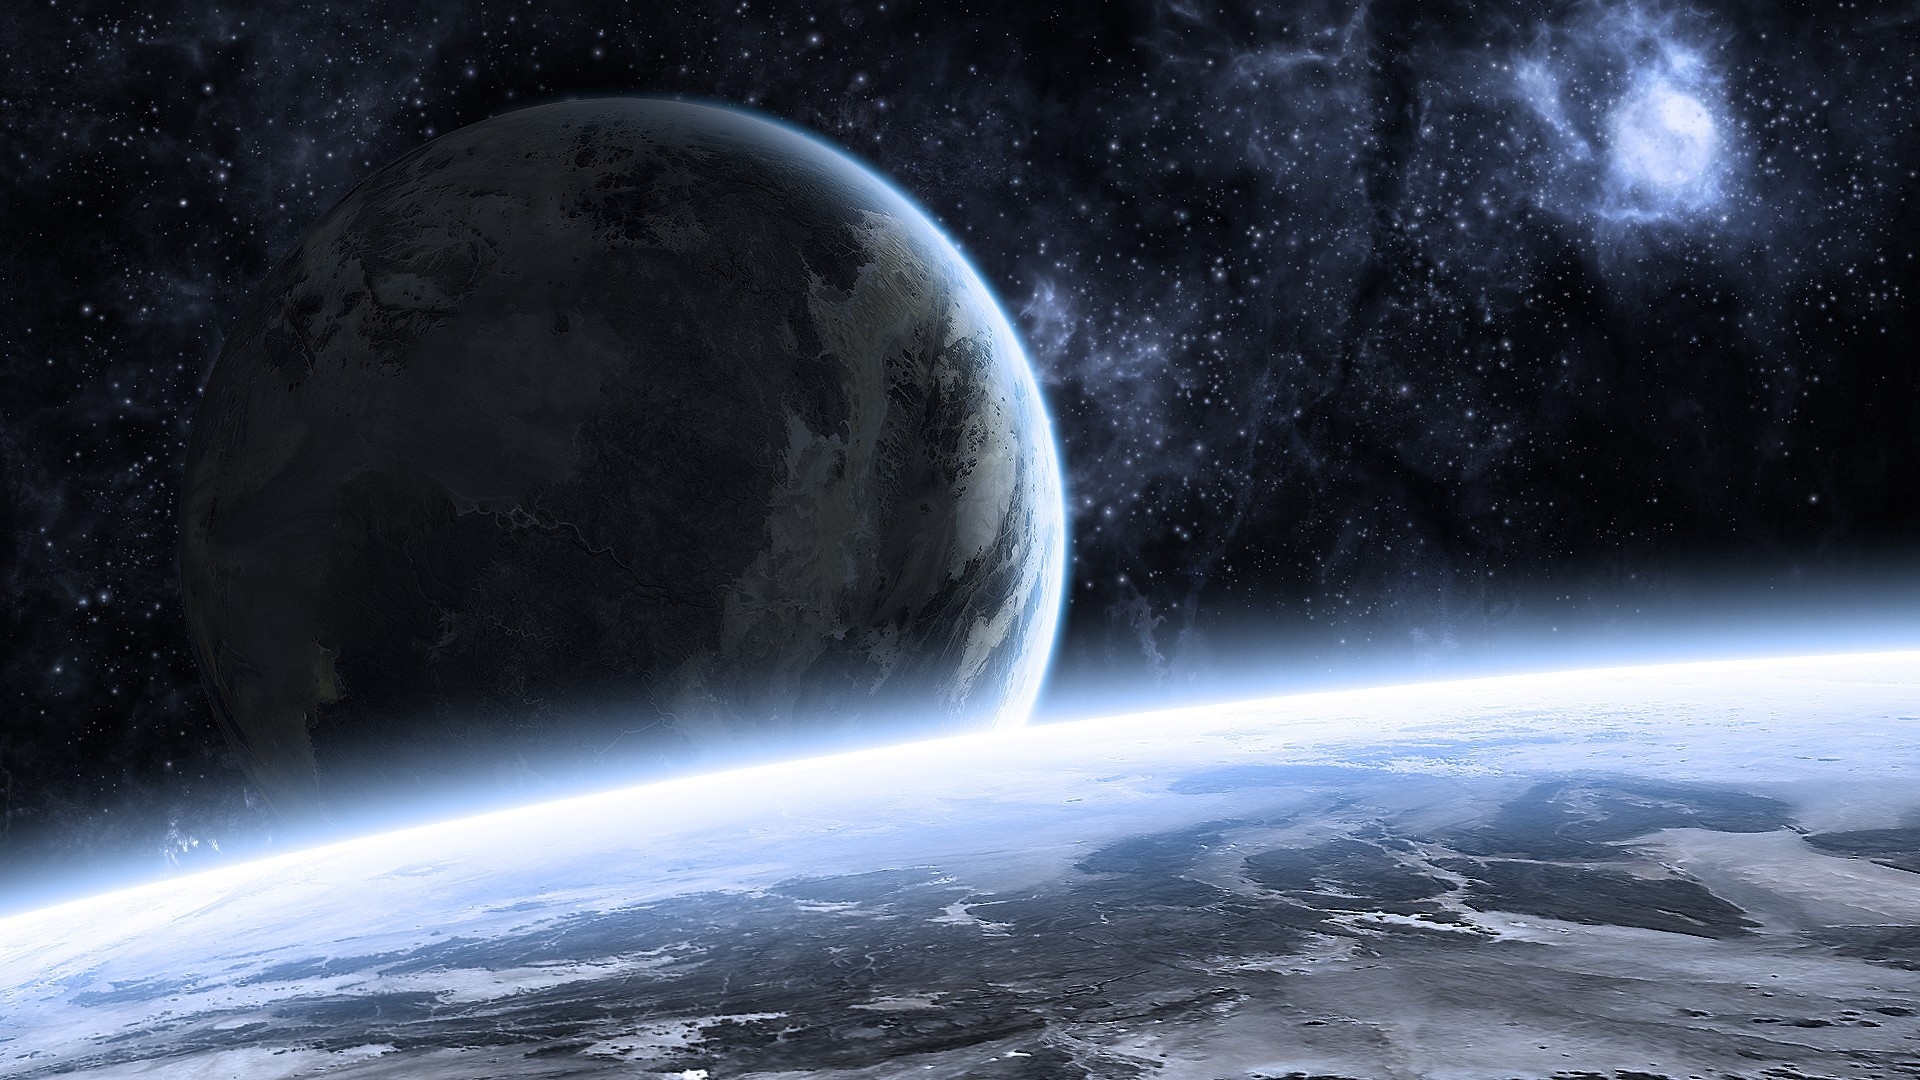 Beautiful Space Landscape for 1920 x 1080 HDTV 1080p resolution